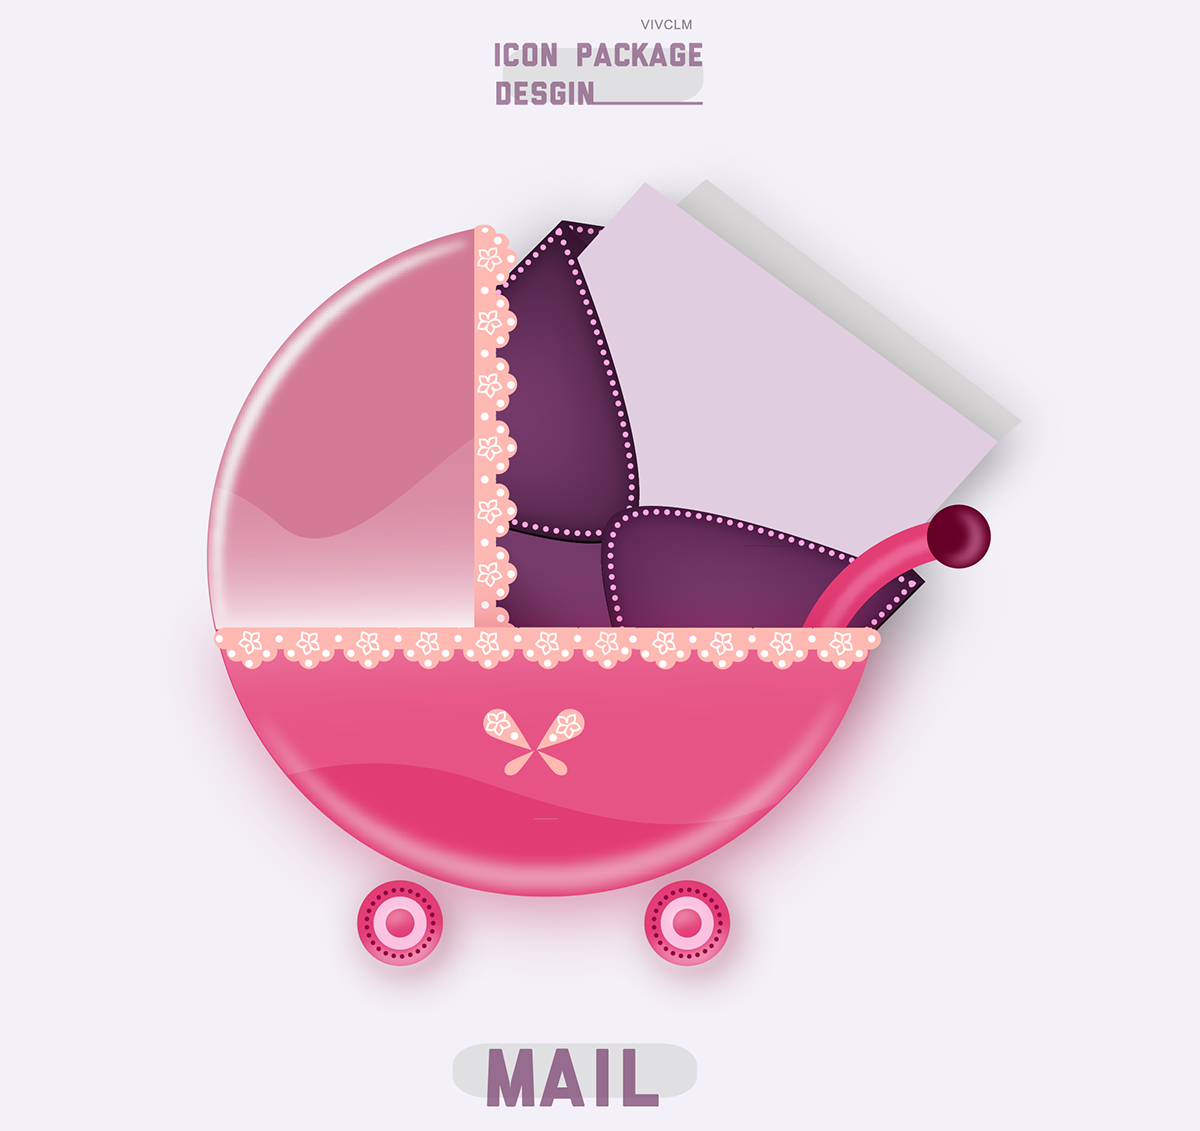 icons design mail home next previous Exit music icon baby trolley babytrolley pink purple lace camera